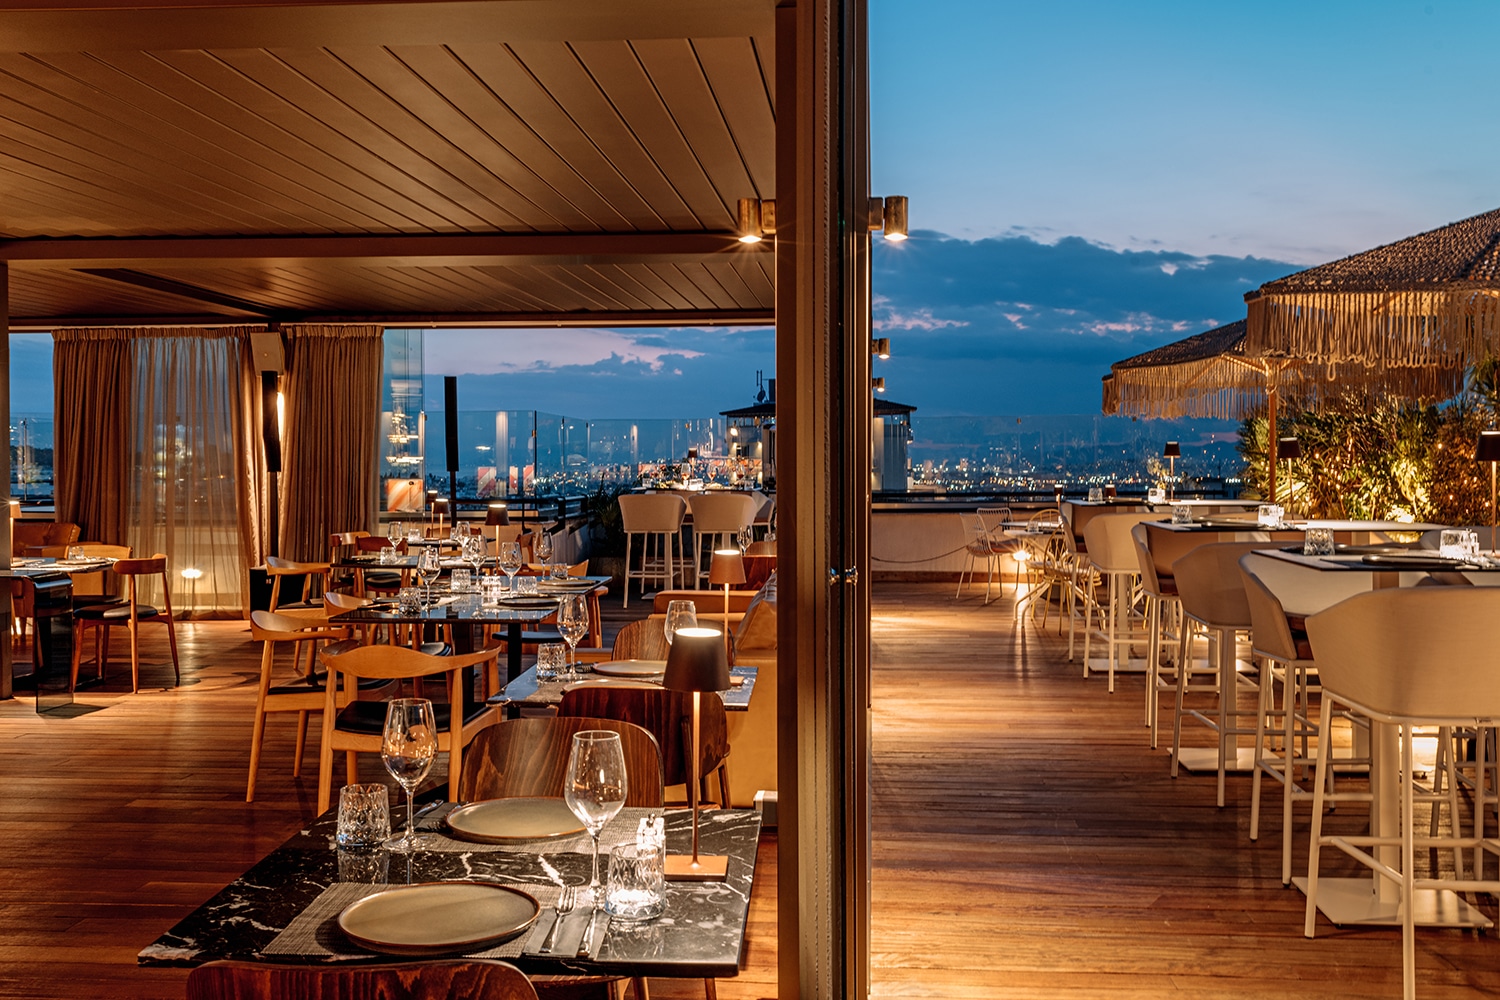 Brown_Acropol_Rooftop_Restaurant_evenings_lights_and_tables